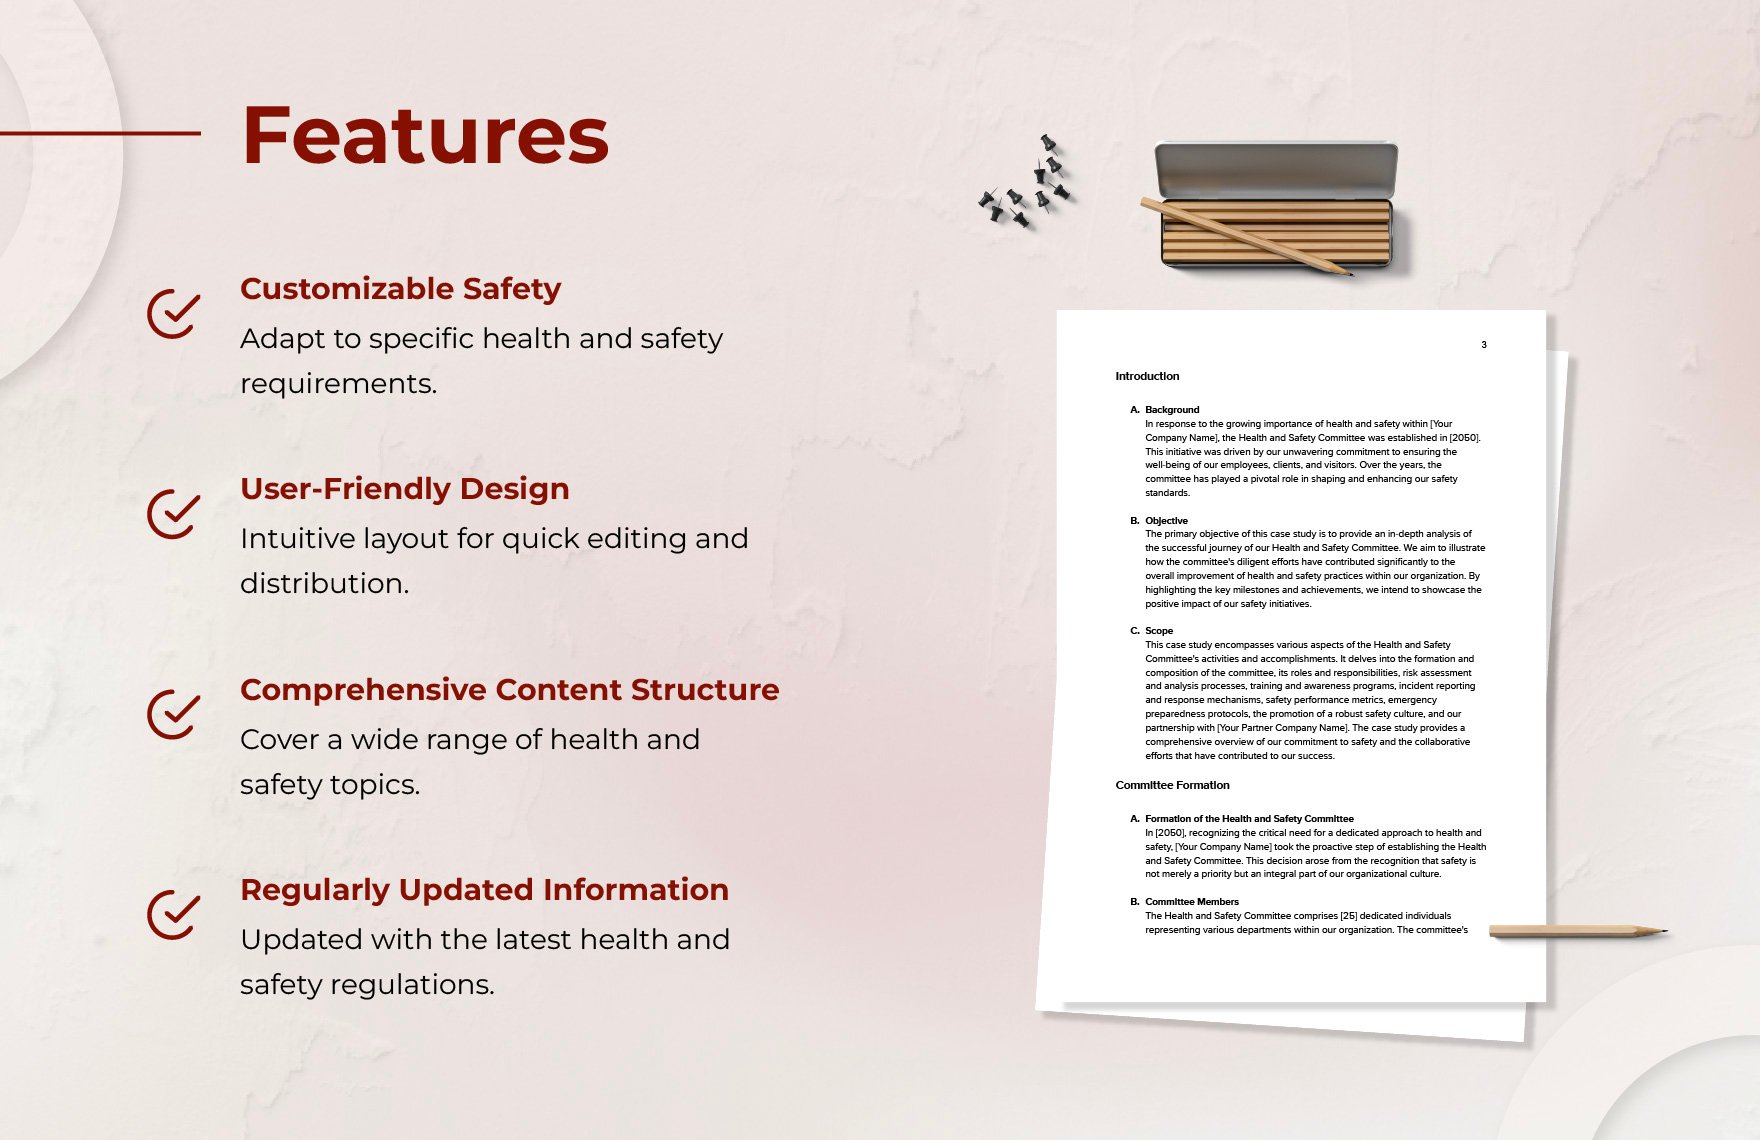 Health & Safety Case Study on Committee Success Template